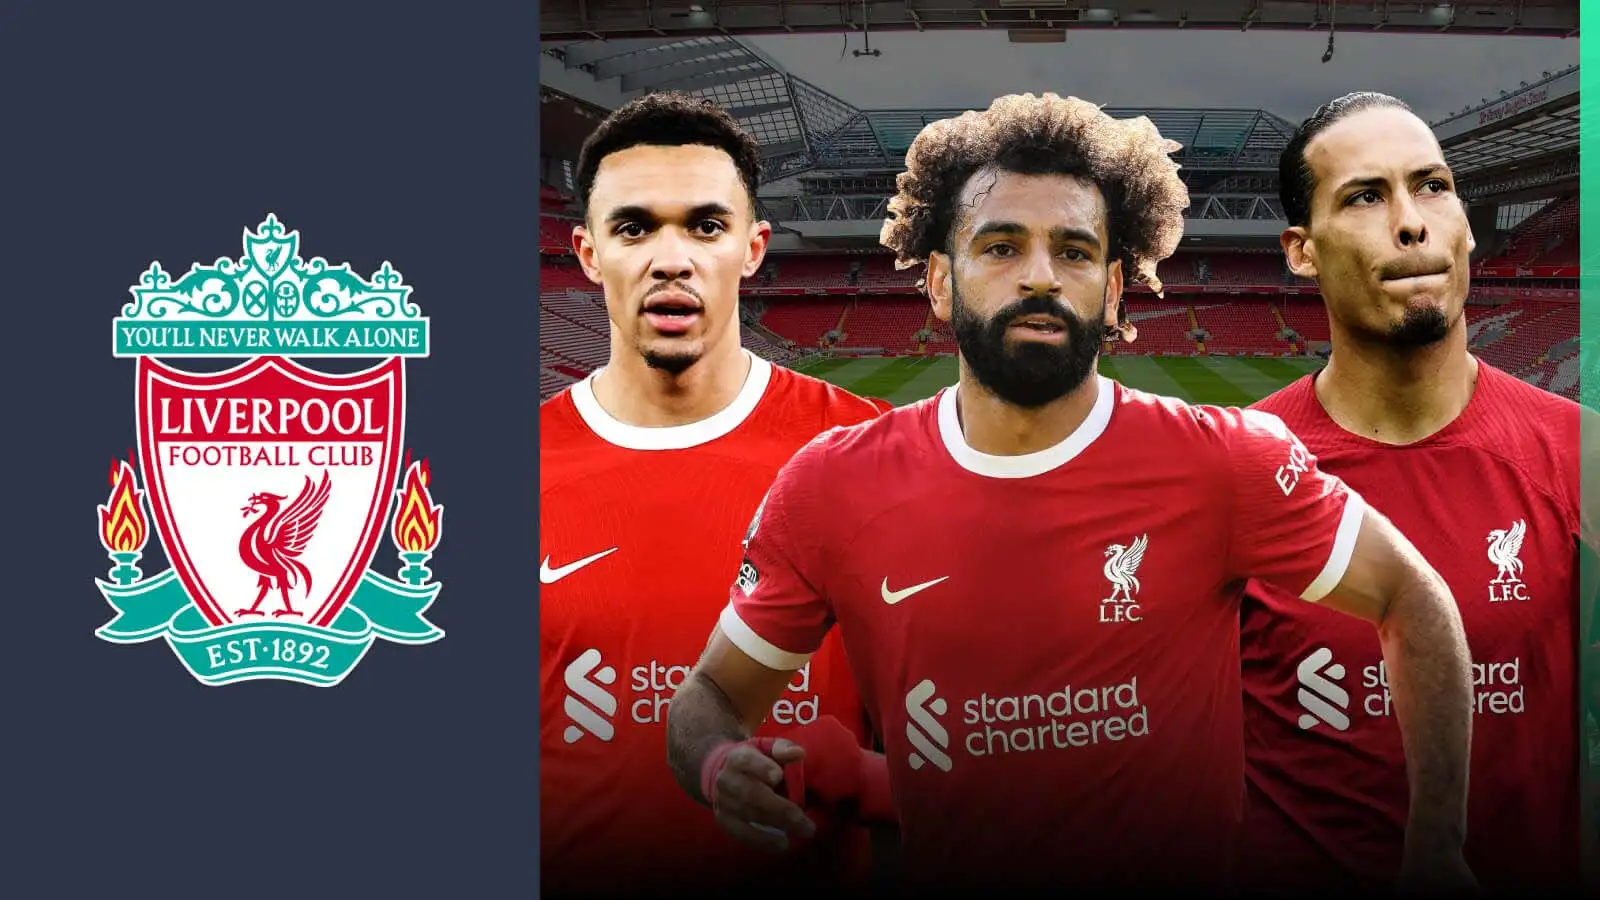 Liverpool want Mohamed Salah, Virgil van Dijk and Trent Alexander-Arnold to sign new contracts